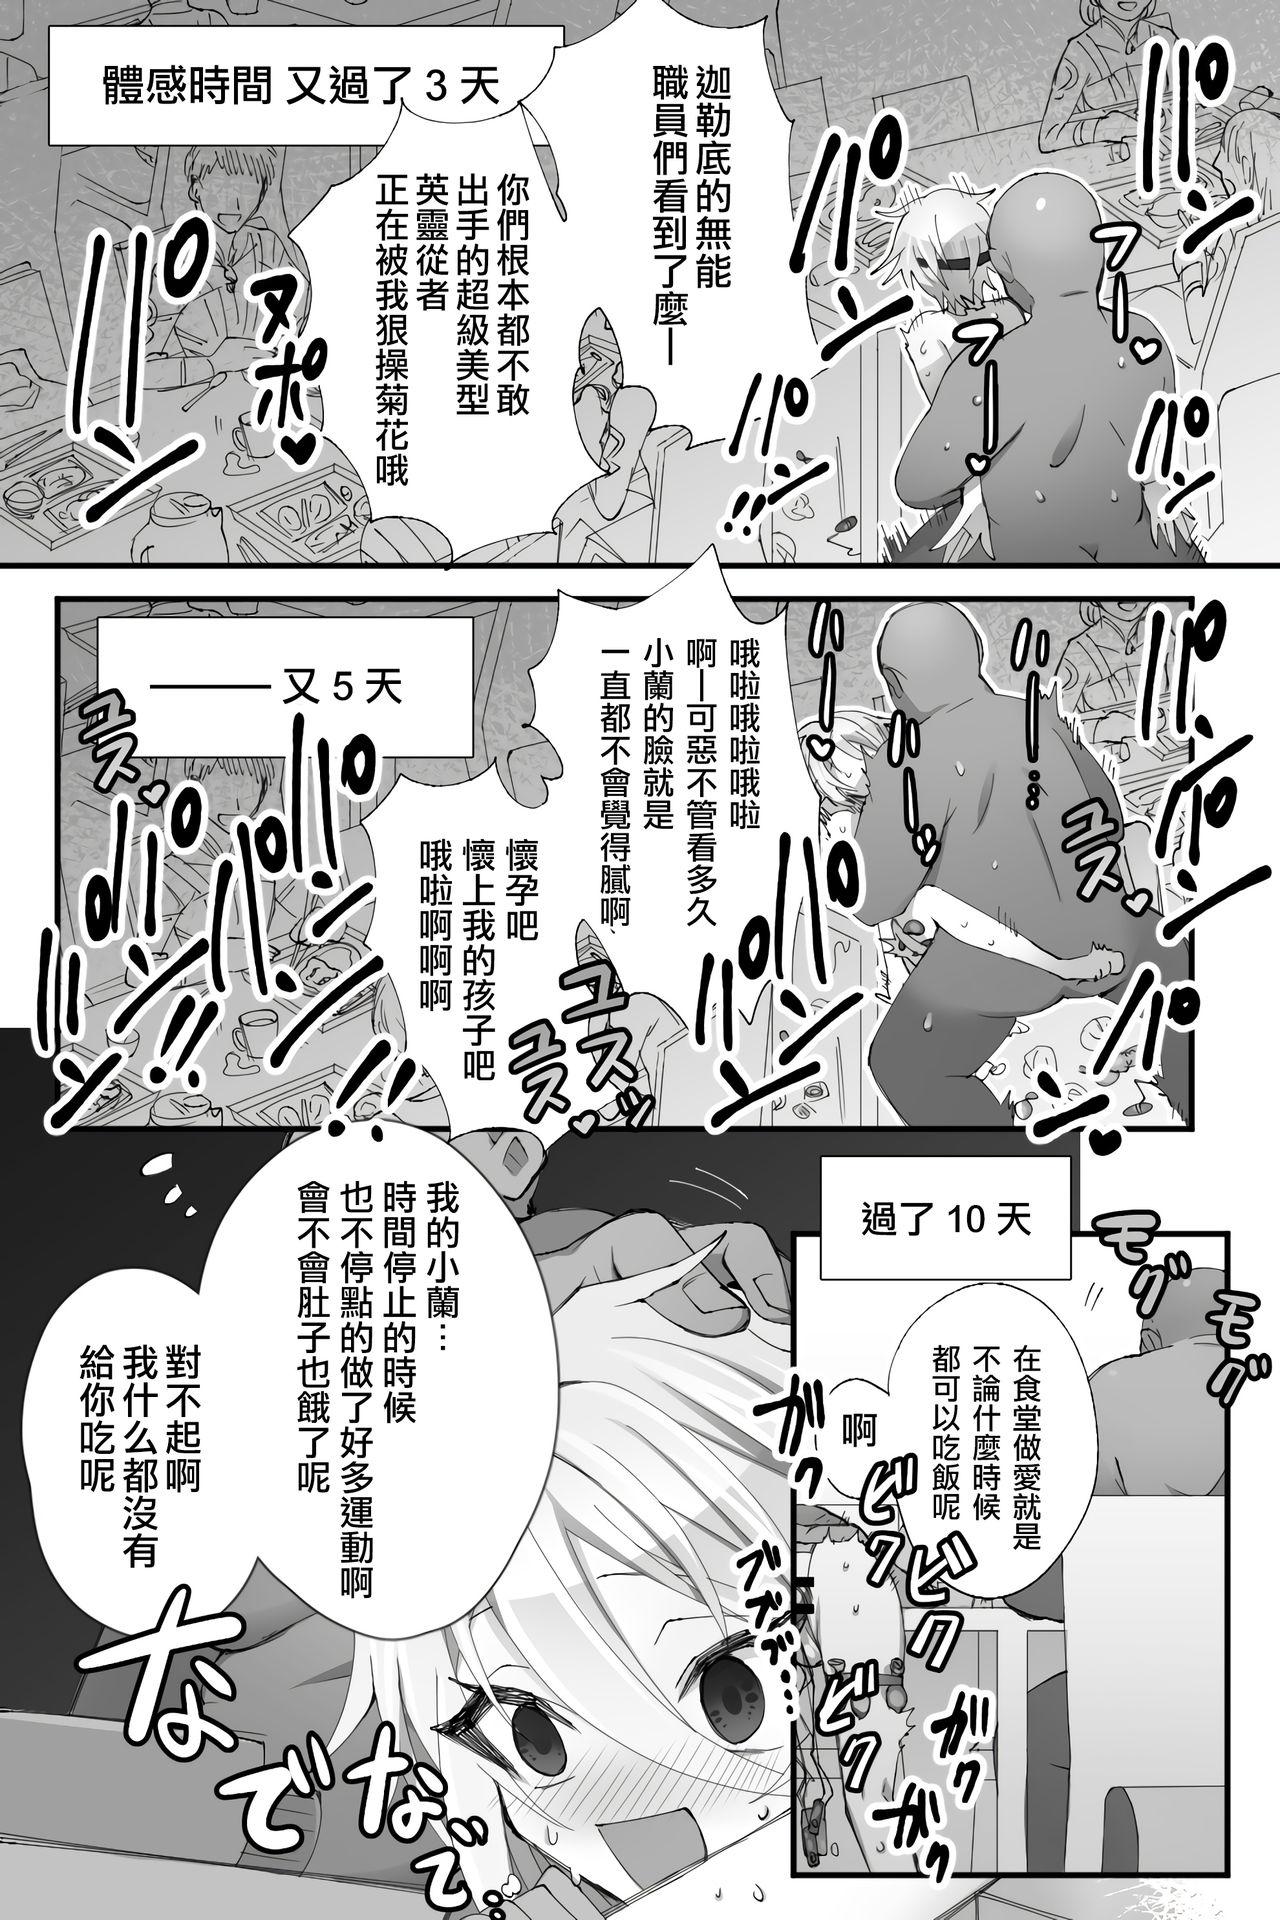 Best Blowjob Tokitome in Chaldea | 时间停止IN迦勒底 - Fate grand order Guy - Page 7